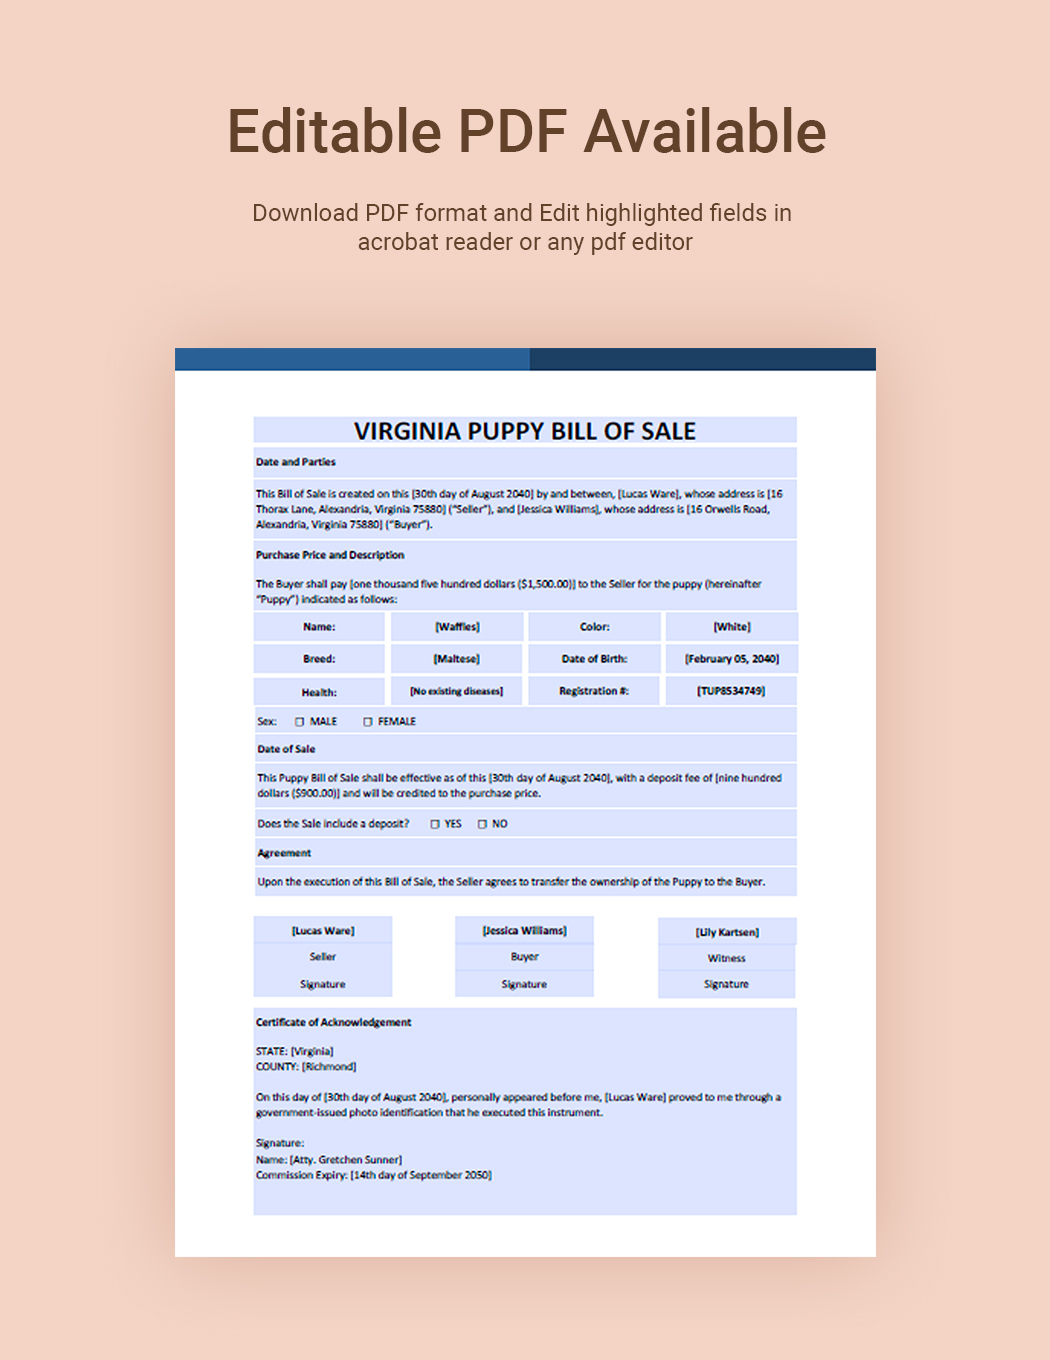 Virginia Dog / Puppy Bill of Sale Form Template